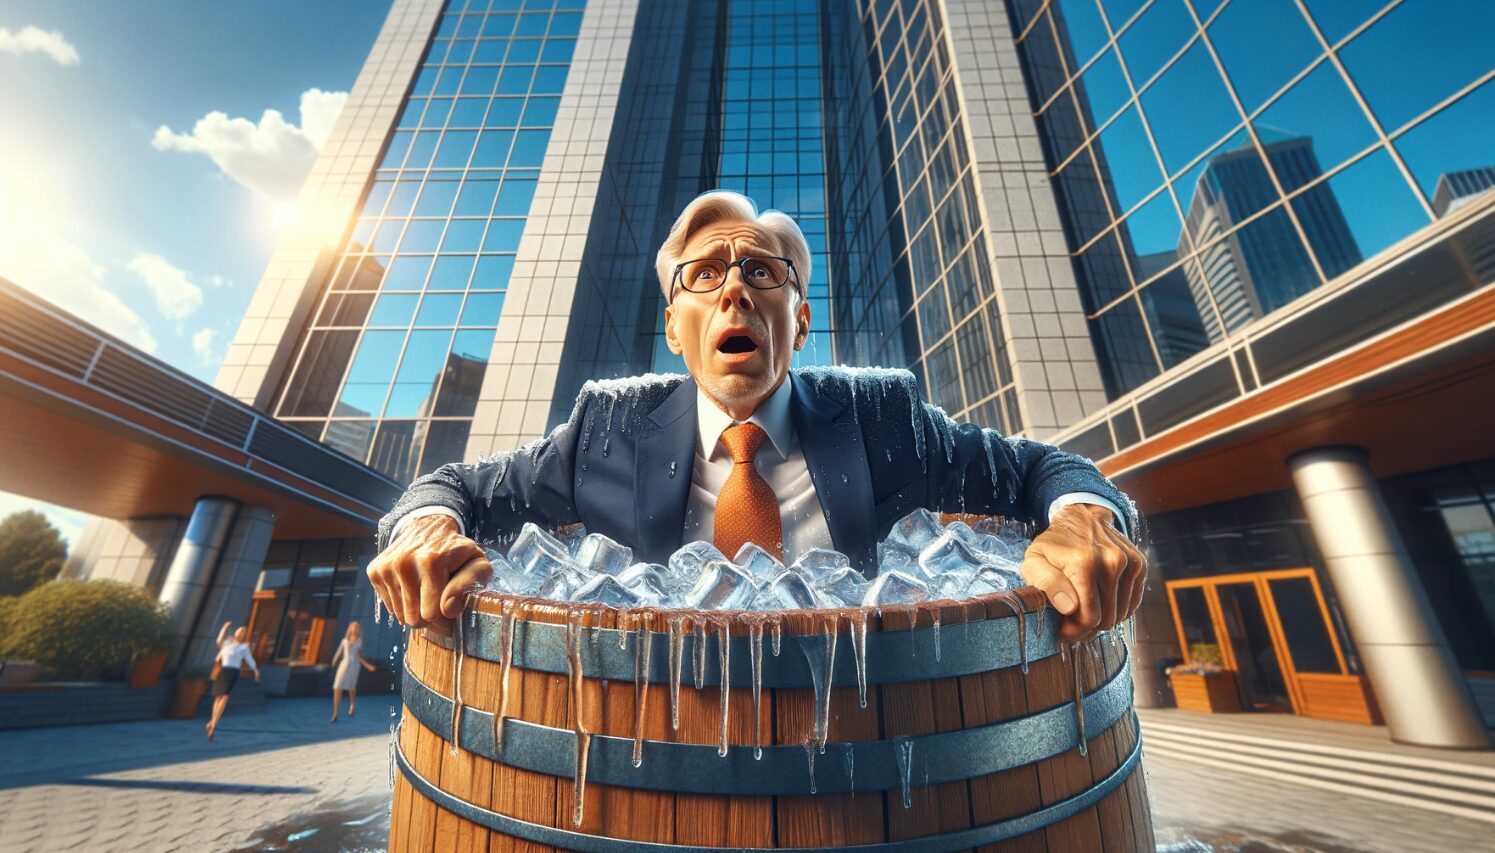 A man in a suit sits in a bucket of ice in front of a skyscraper doing a cold plunge.